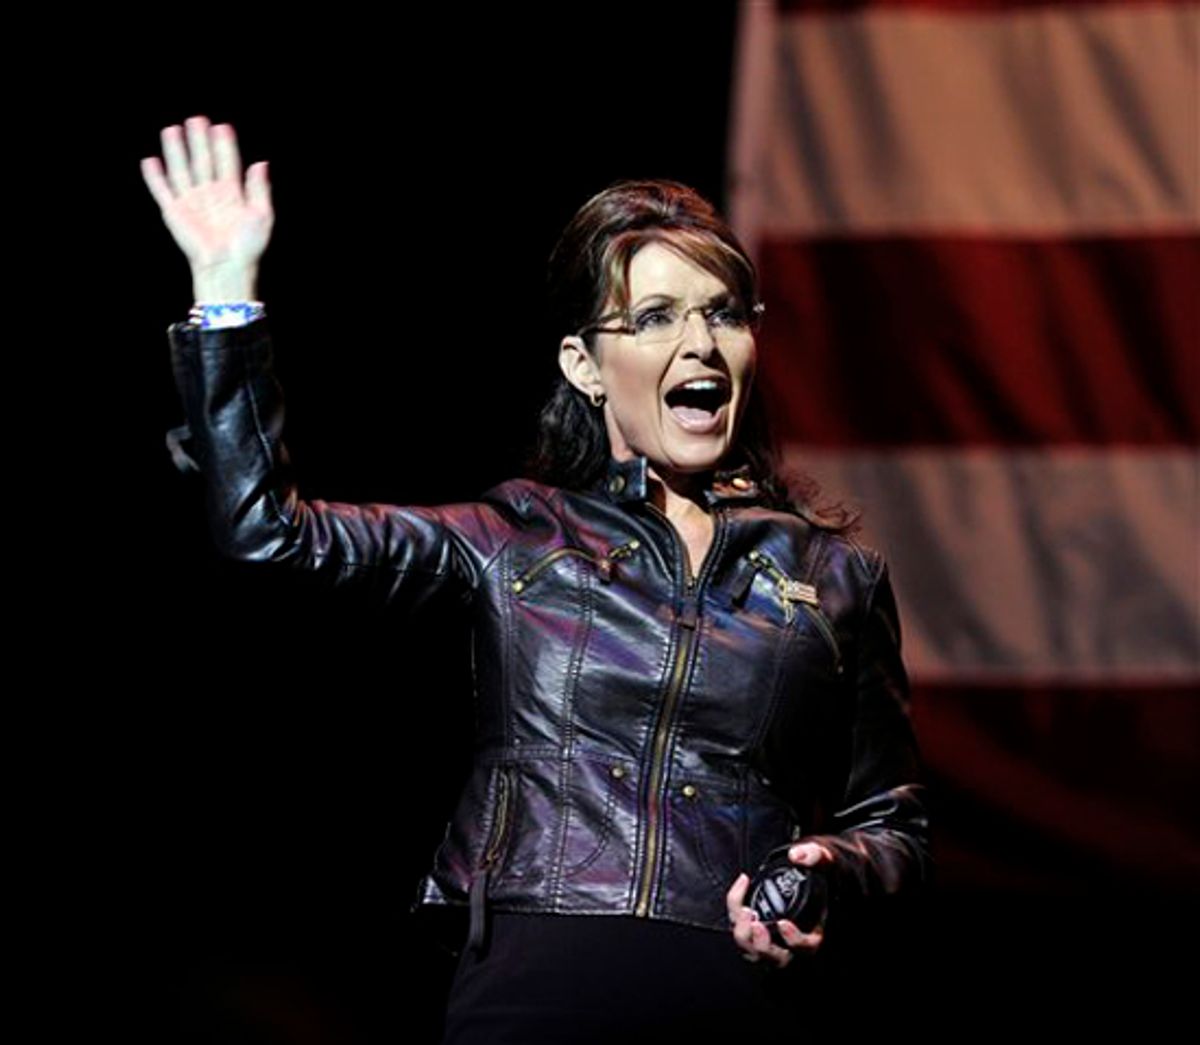 Sarah Palin, the former Republican vice-presidential nominee talks to supporters at an "Evening with Sarah Palin" event on Wednesday, May 12, 2010, in Rosemont, Illinois. (AP Photo/Jim Prisching) (Jim Prisching)